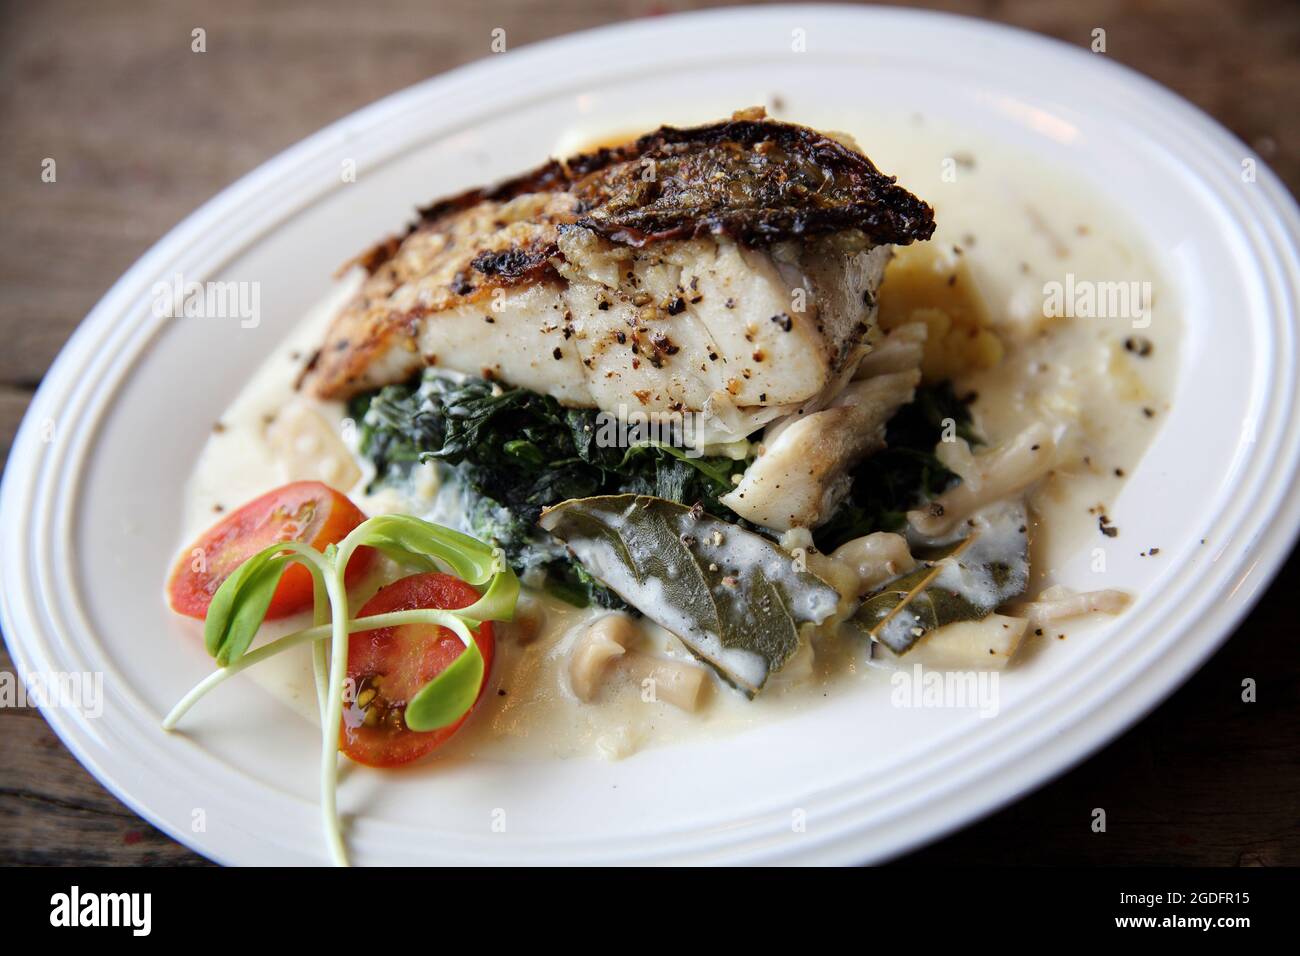 Grill sea bass fillets with crushed potatoes Stock Photo